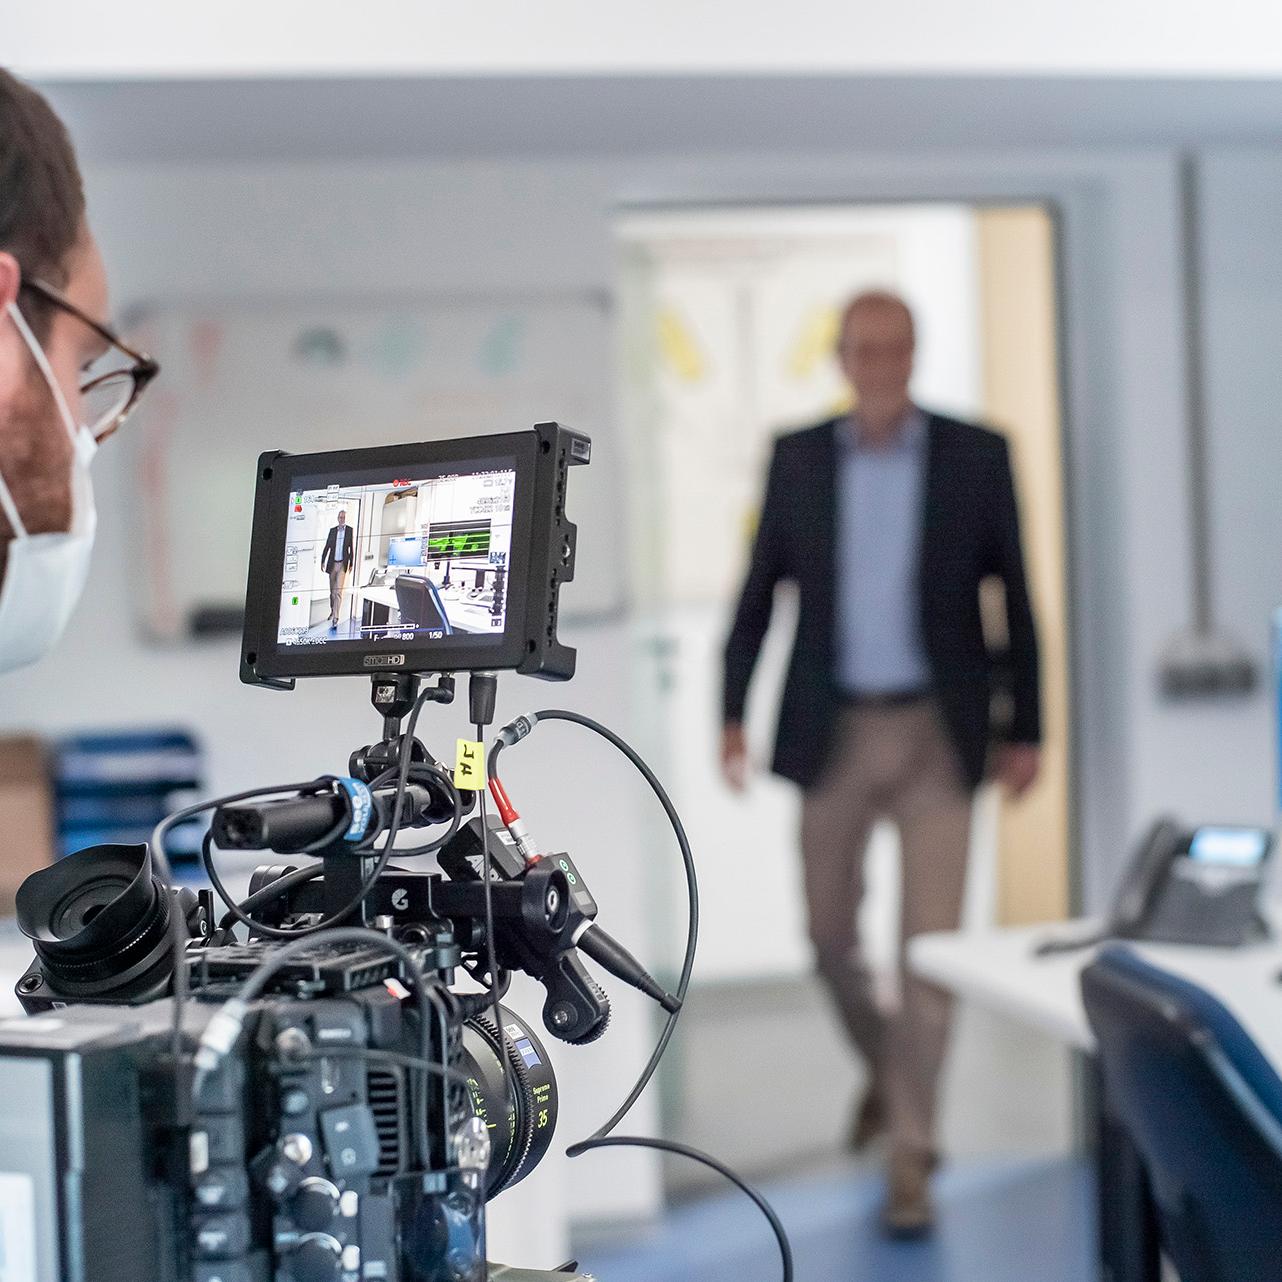 Making-Of Interview with Prof. Joachim Mayer, Materials Scientist at RWTH Aachen University.